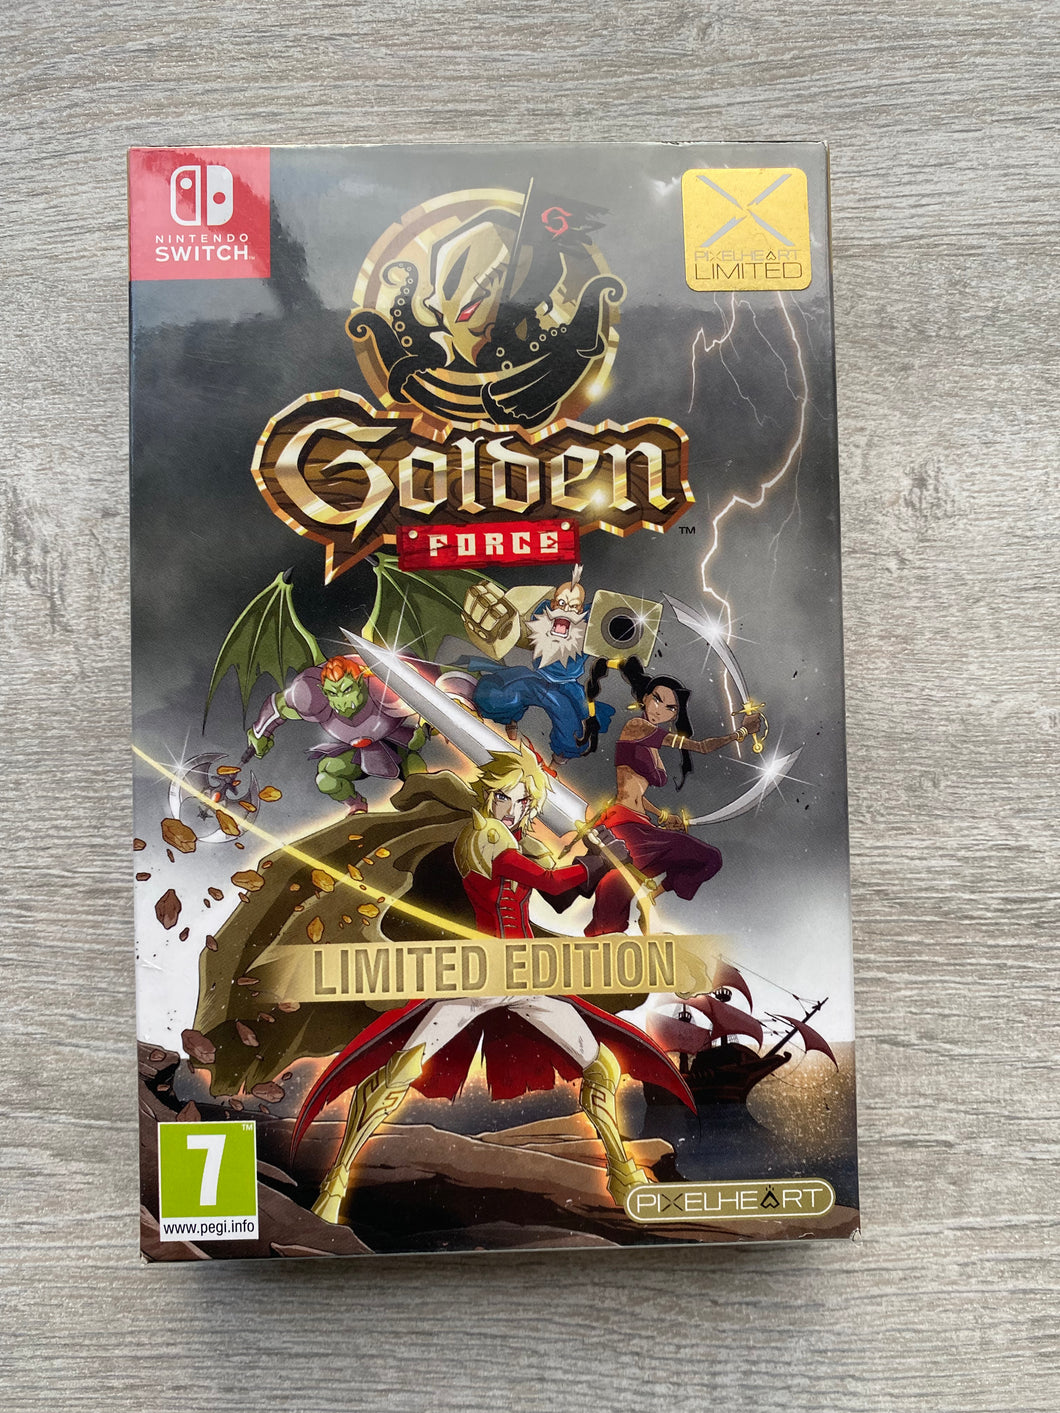 Golden force Limited edition / Pixelheart / Switch / 4000 copies